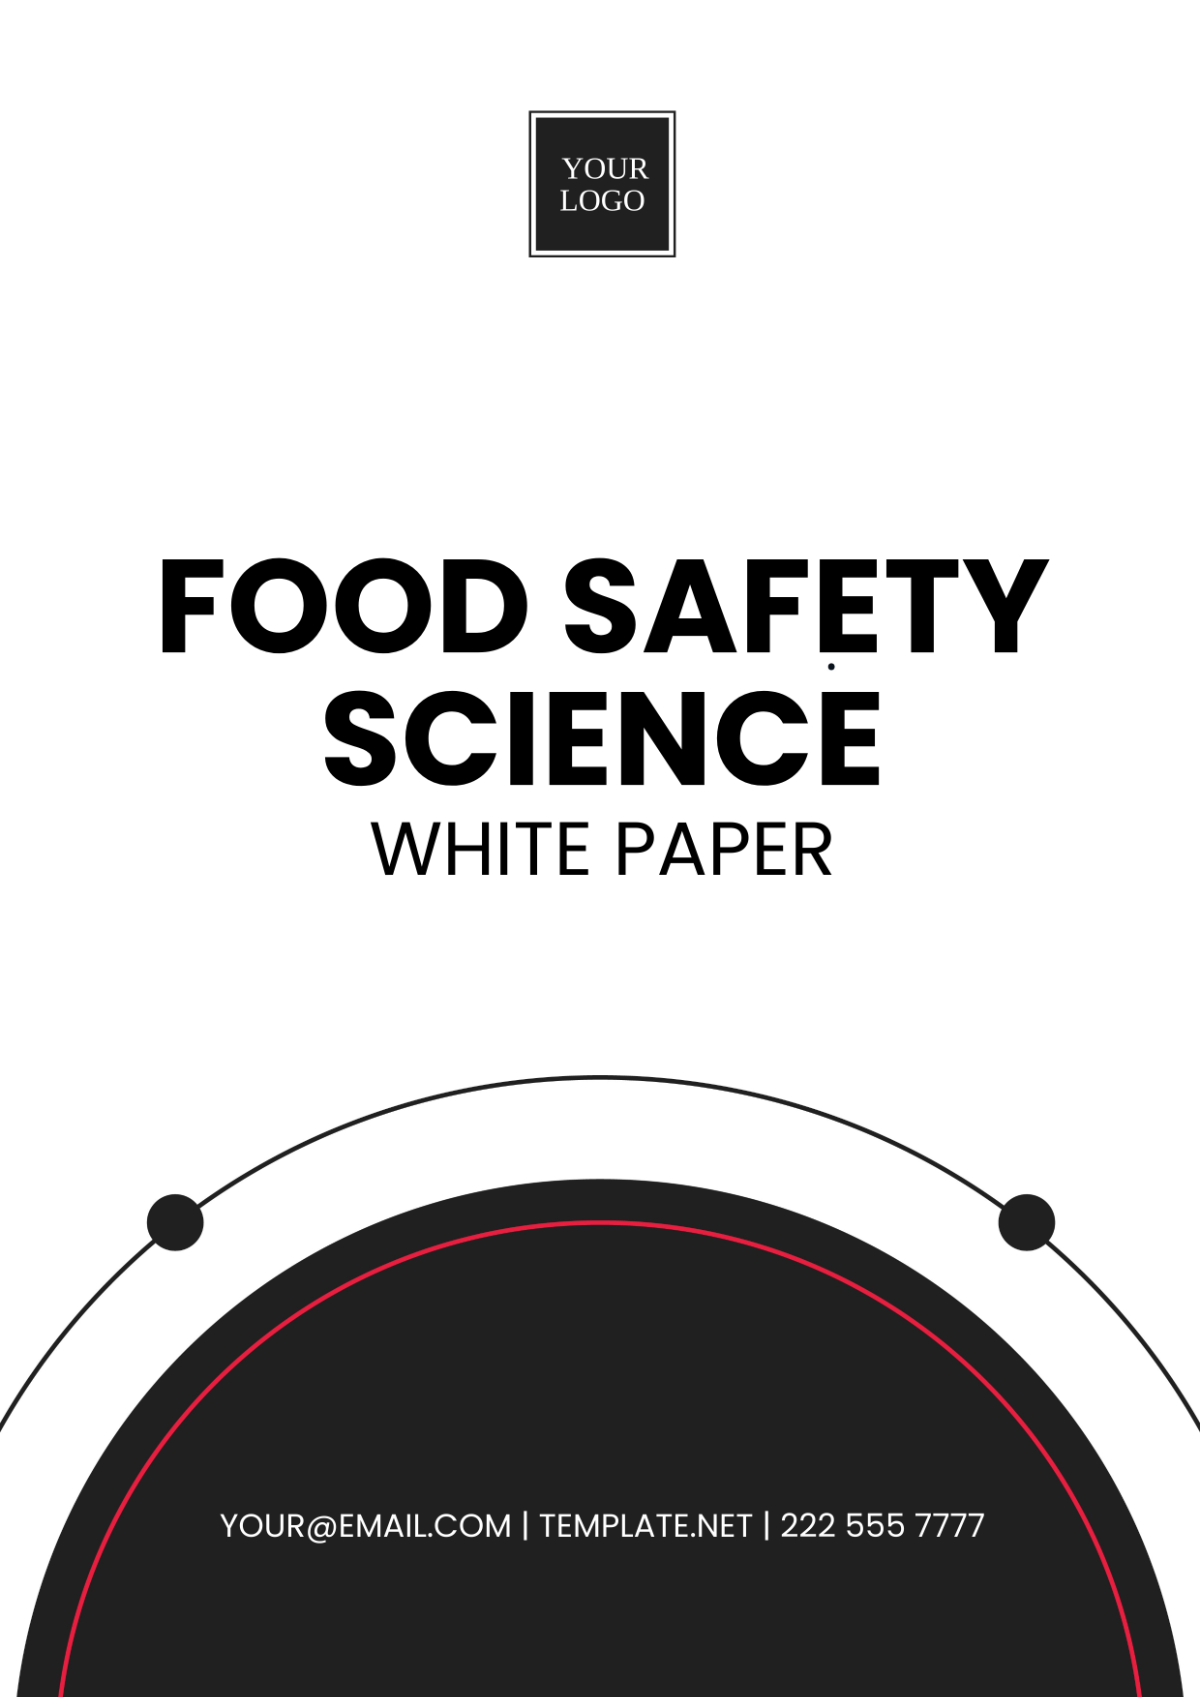 Food Safety Science White Paper Template